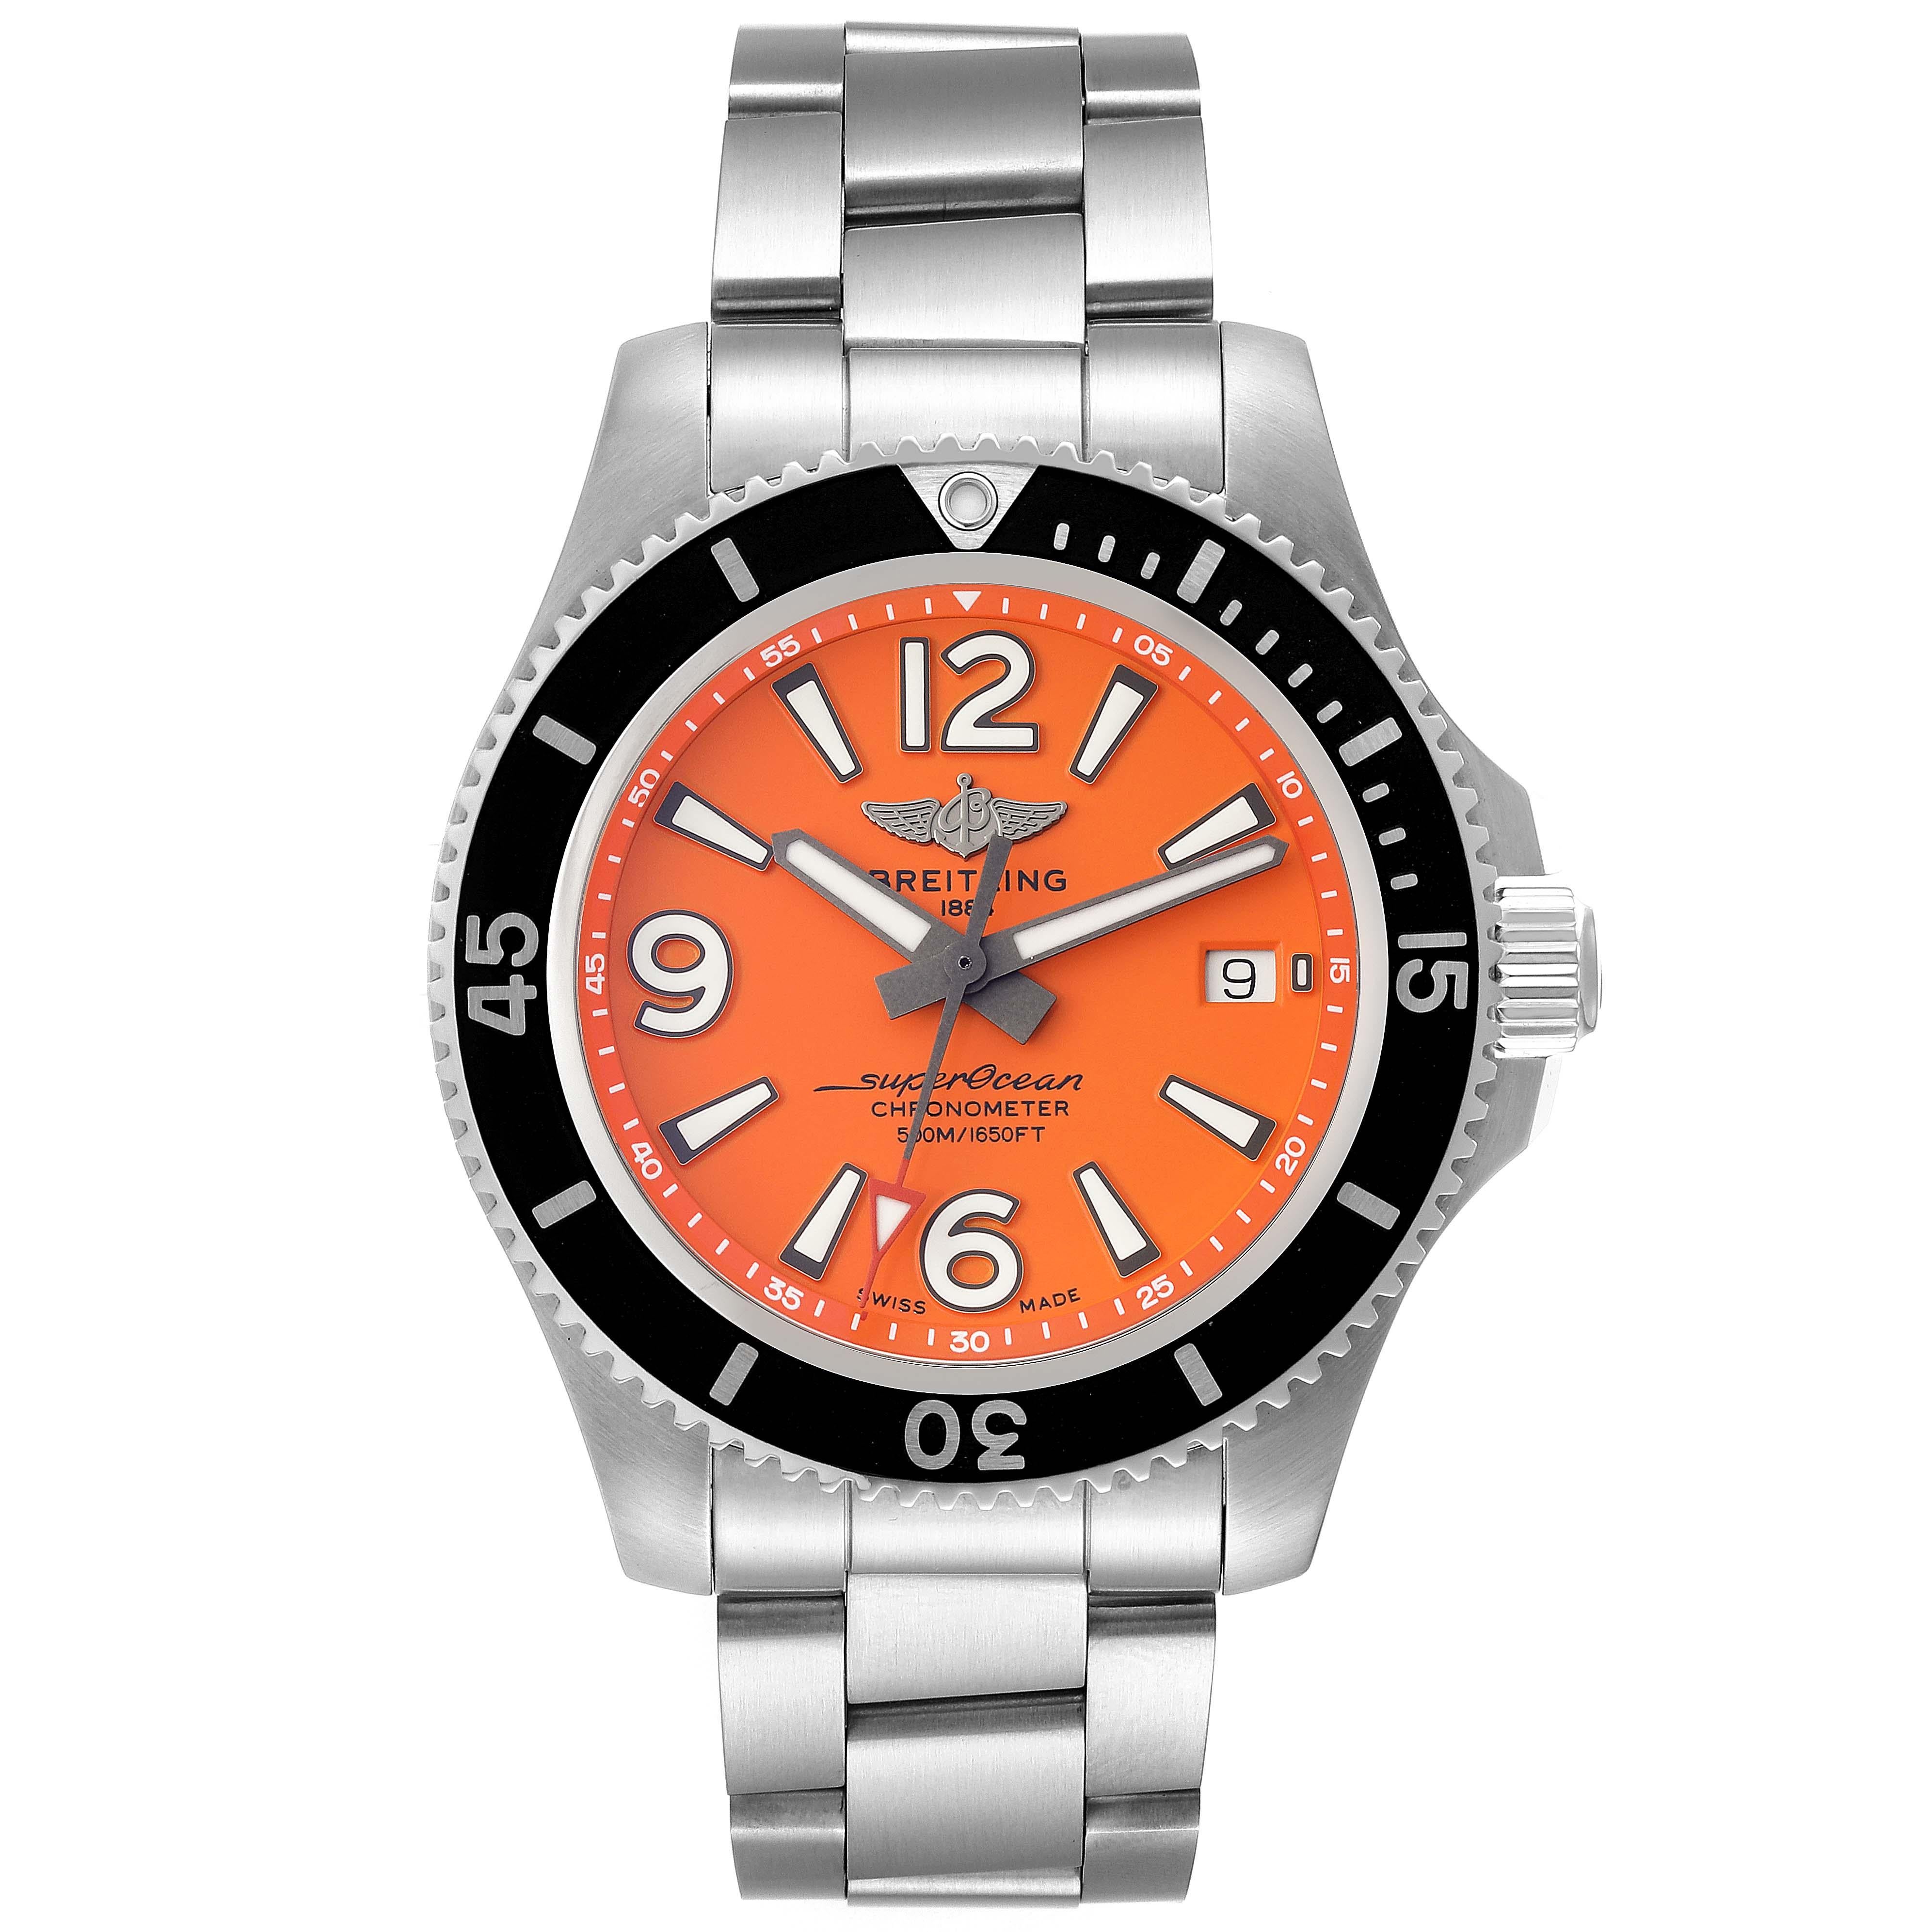 Breitling Superocean 42 Orange Dial Steel Mens Watch A17366 Box Card. Authomatic self-winding movement. Stainless steel case 42.0 mm in diameter. Stainless steel screwed-down crown. Black stainless steel unidirectional revolving bezel. 0-60